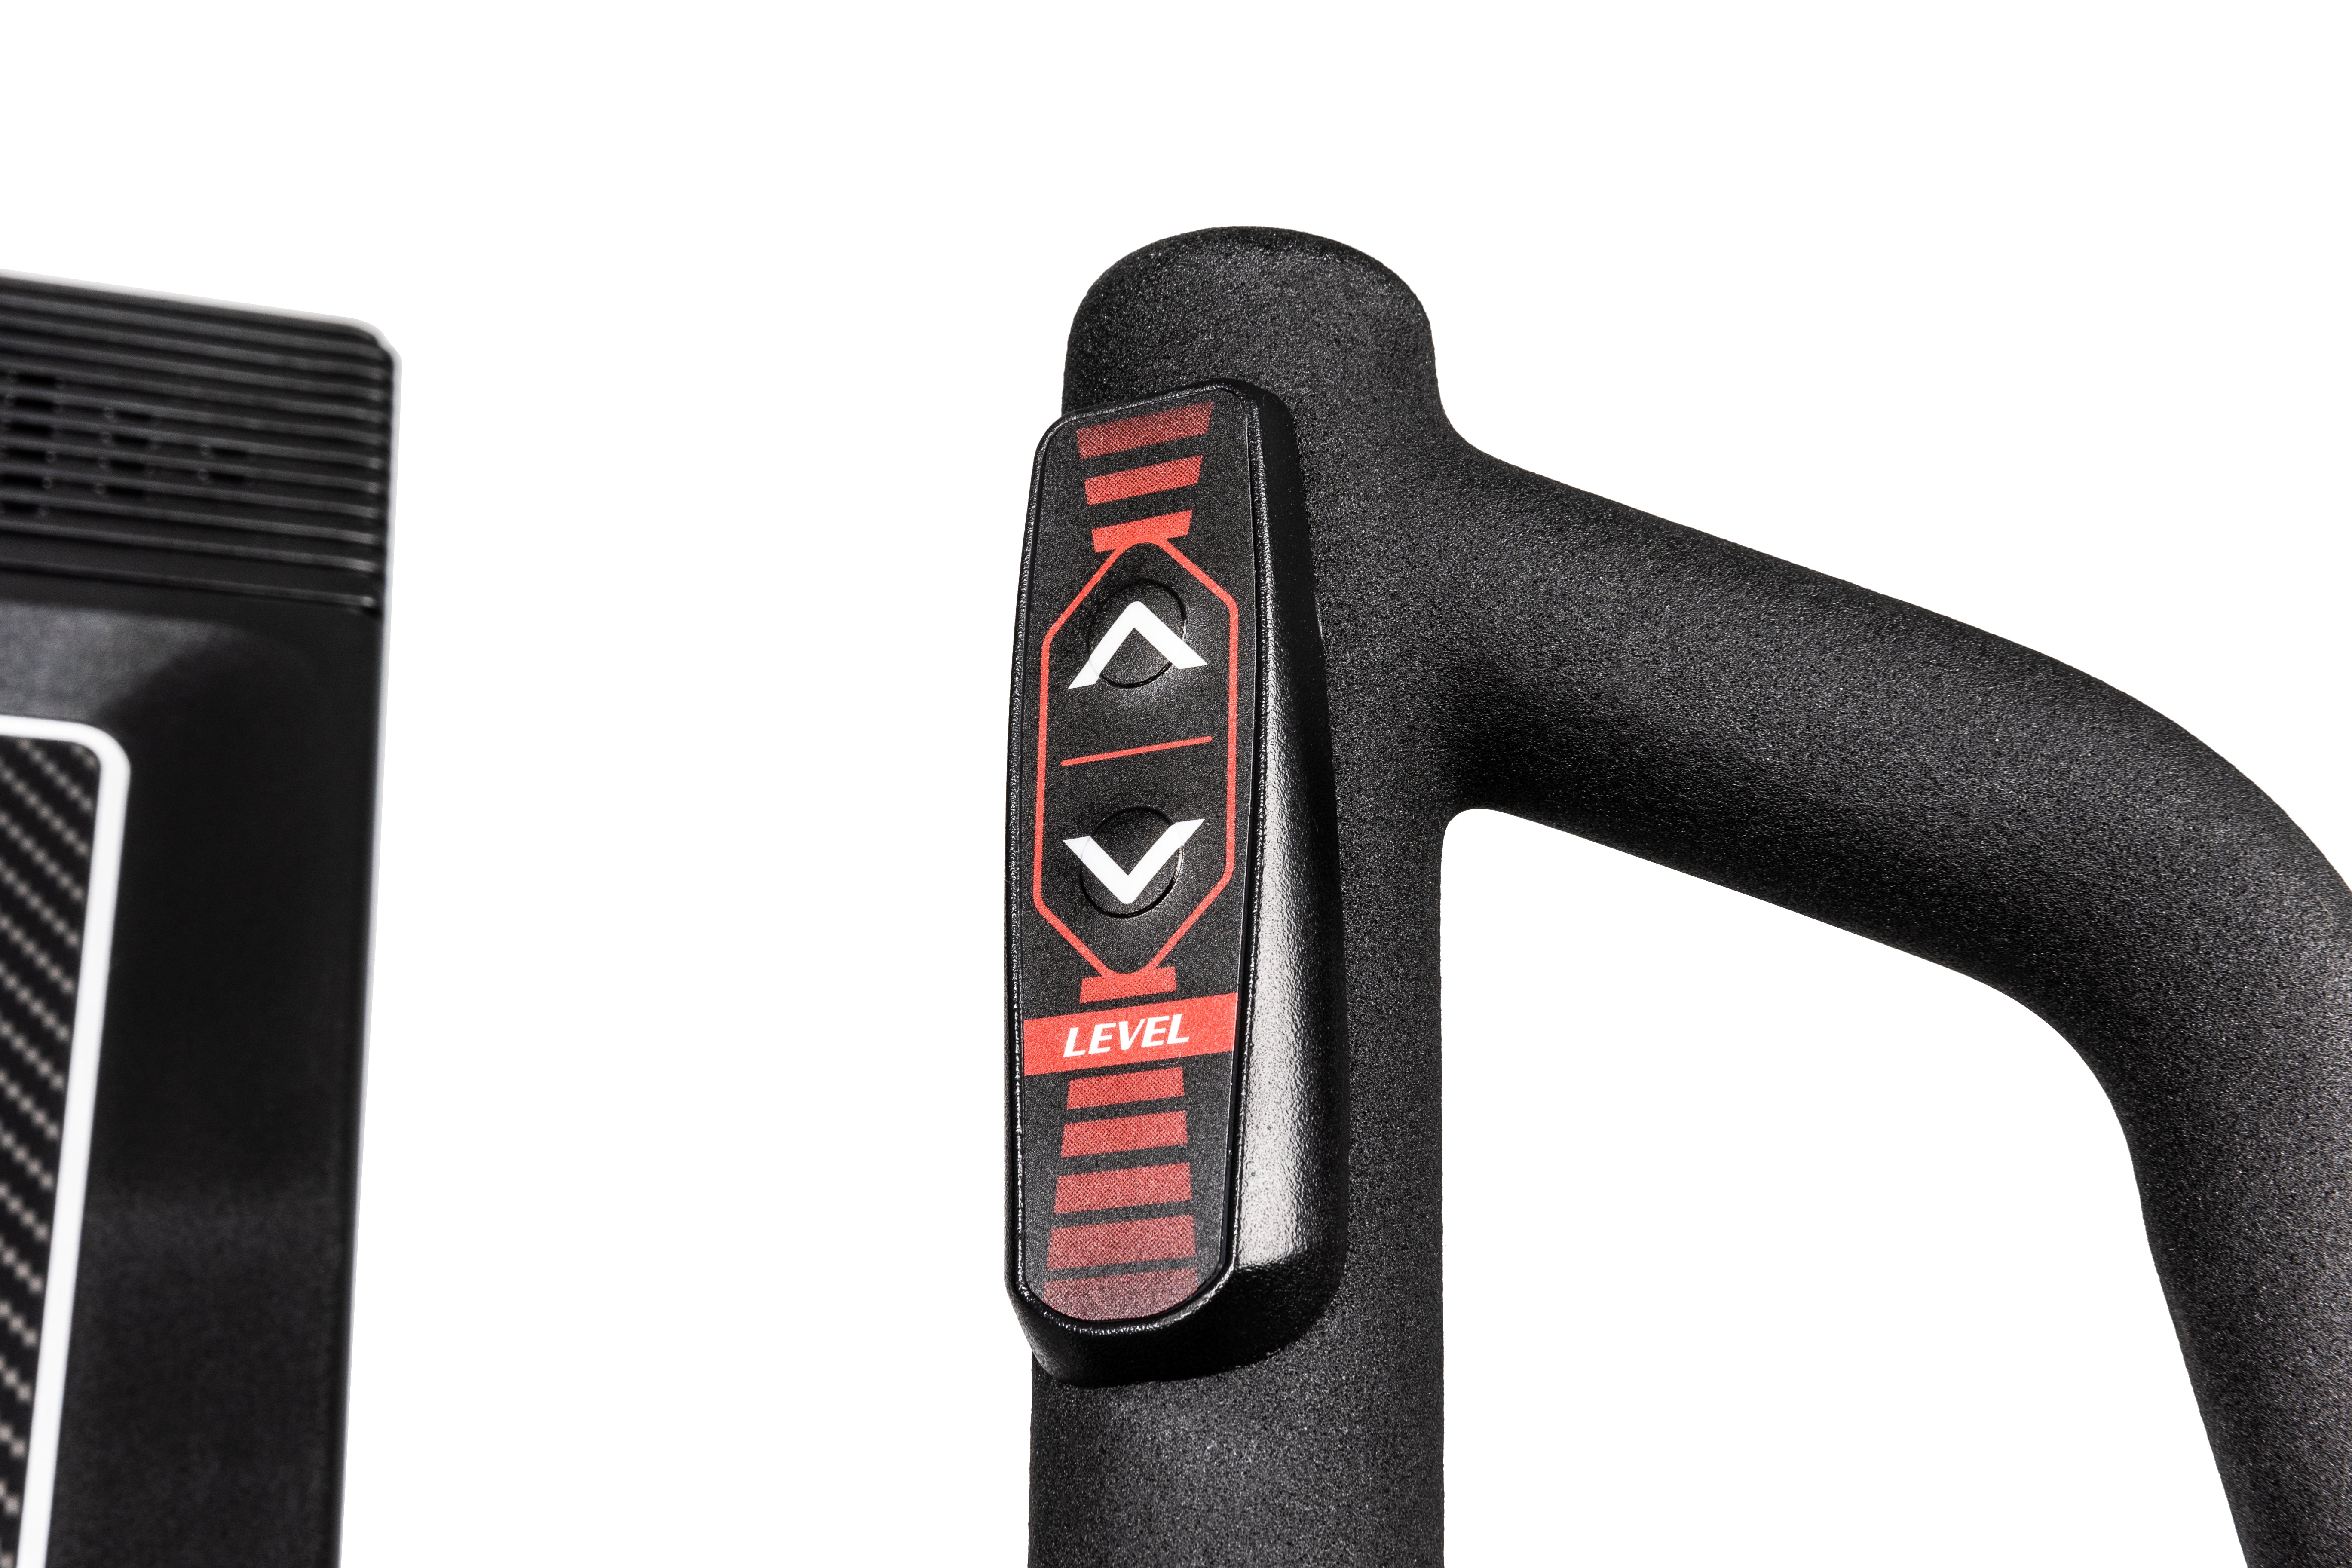 Close-up of the Sole E35 elliptical machine's handlebar, showcasing the textured grip and the "LEVEL" control buttons. The buttons, outlined in red, feature upward and downward arrows for resistance level adjustments. A portion of the machine's screen can be seen to the left, with a predominantly white background.